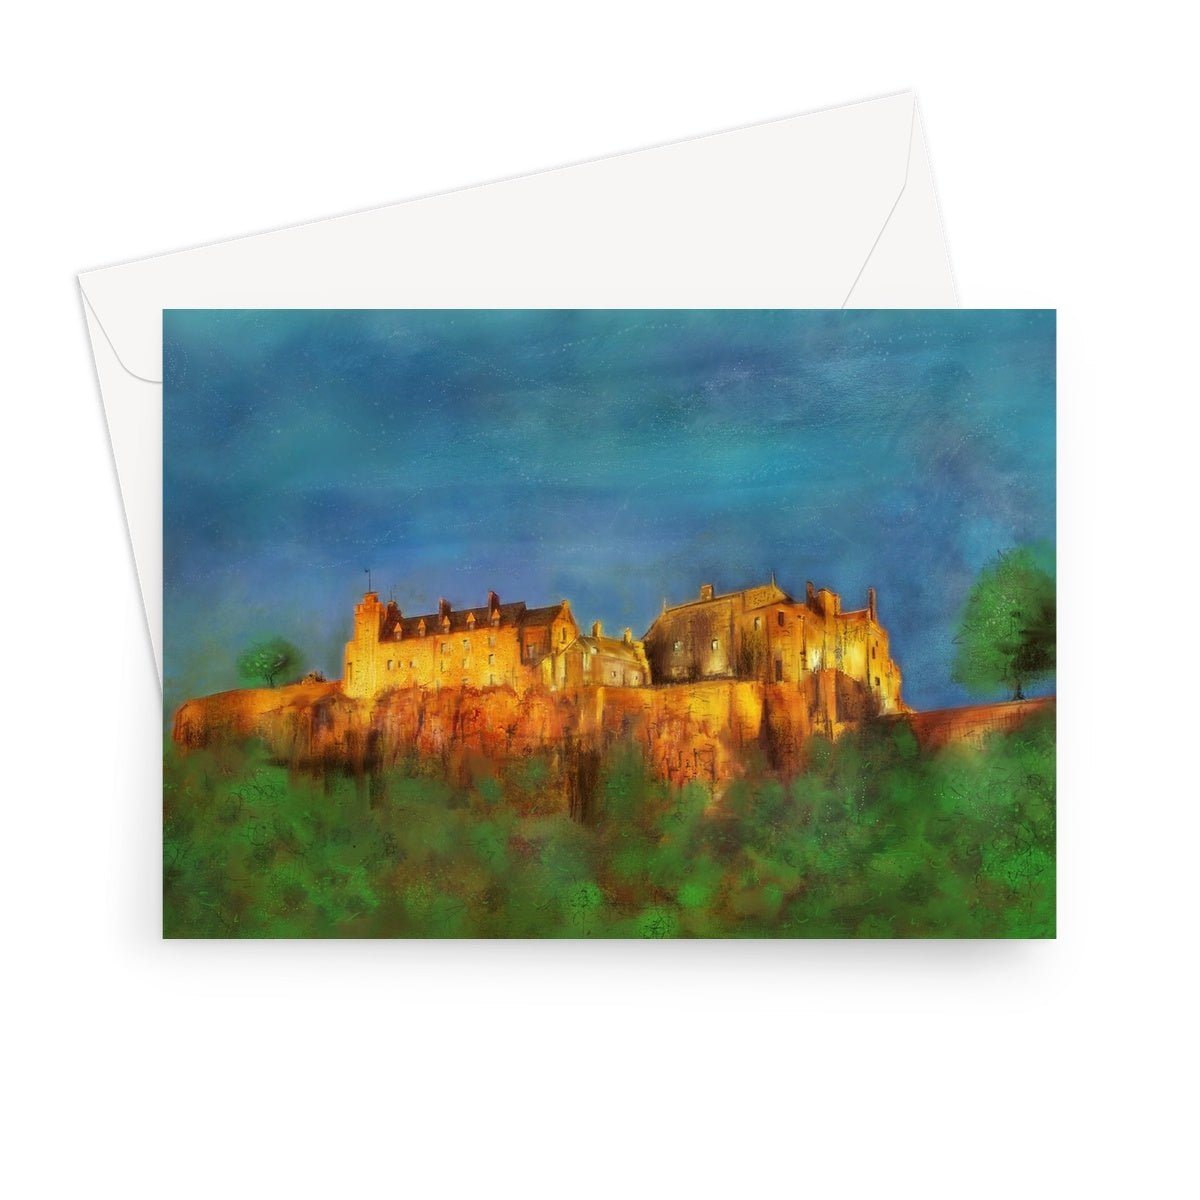 Stirling Castle Art Gifts Greeting Card-Greetings Cards-Historic & Iconic Scotland Art Gallery-7"x5"-10 Cards-Paintings, Prints, Homeware, Art Gifts From Scotland By Scottish Artist Kevin Hunter